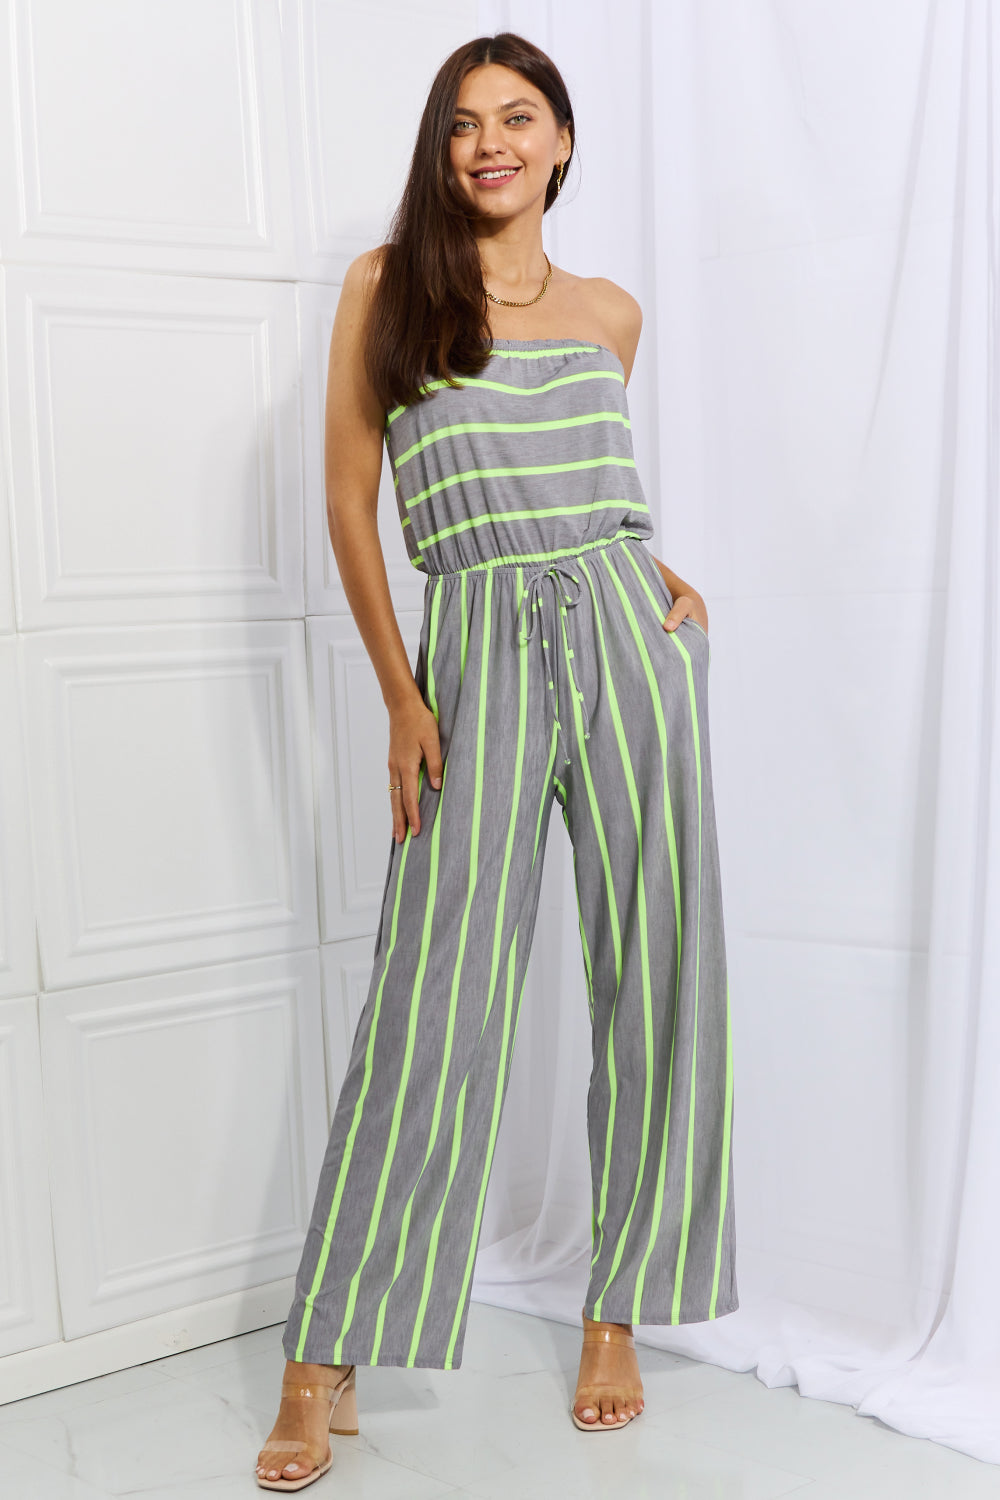 HOW SHE GOT HER GROOVE BACK STRIPED JUMPSUIT